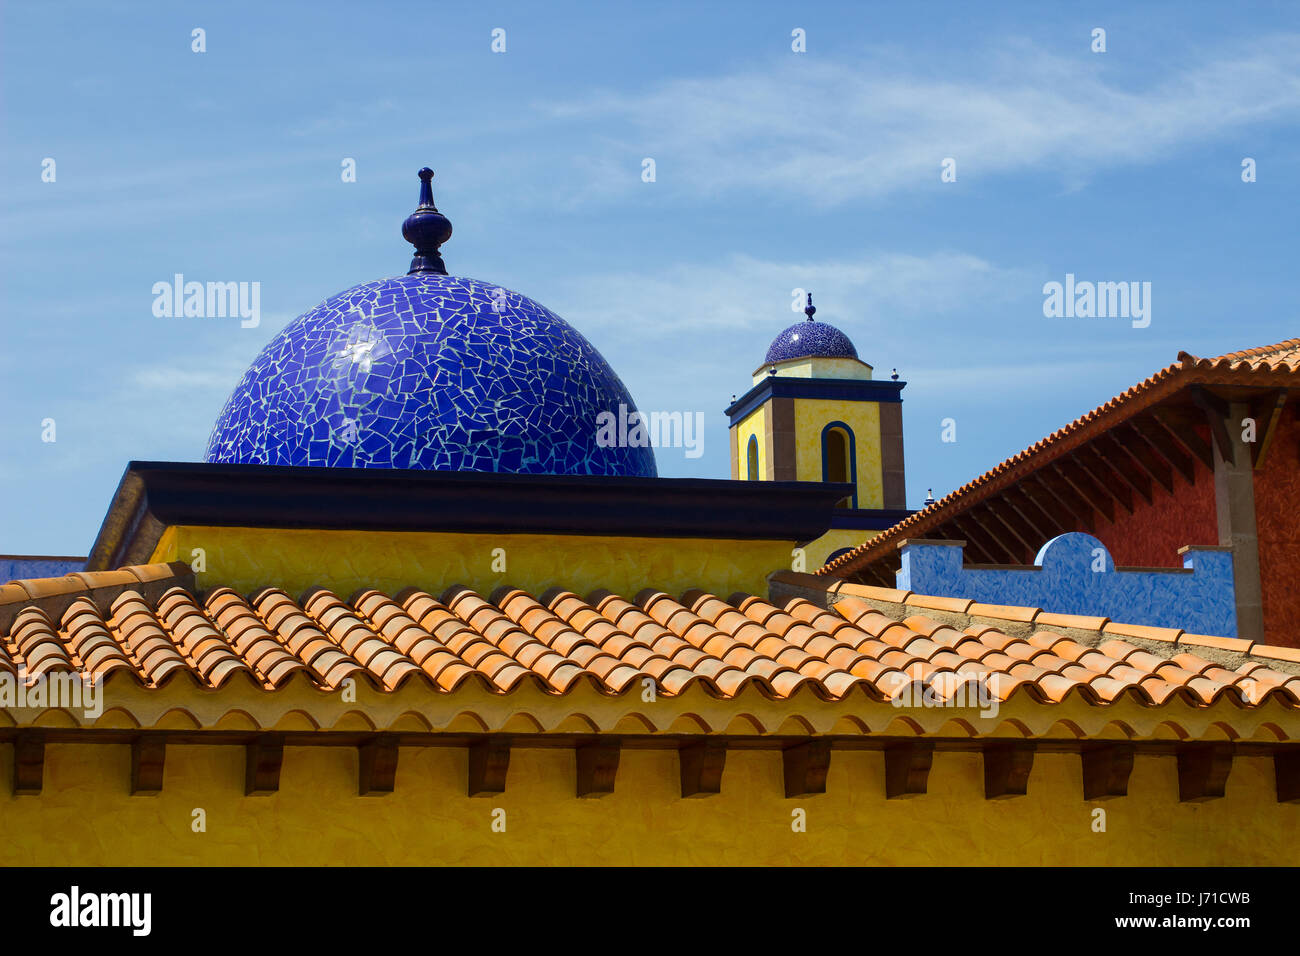 Architectural rooftops in Playa Las Americas in Teneriffe featuring tiled mosaic domes and terracotta tiles in retro Moorish style and design Stock Photo